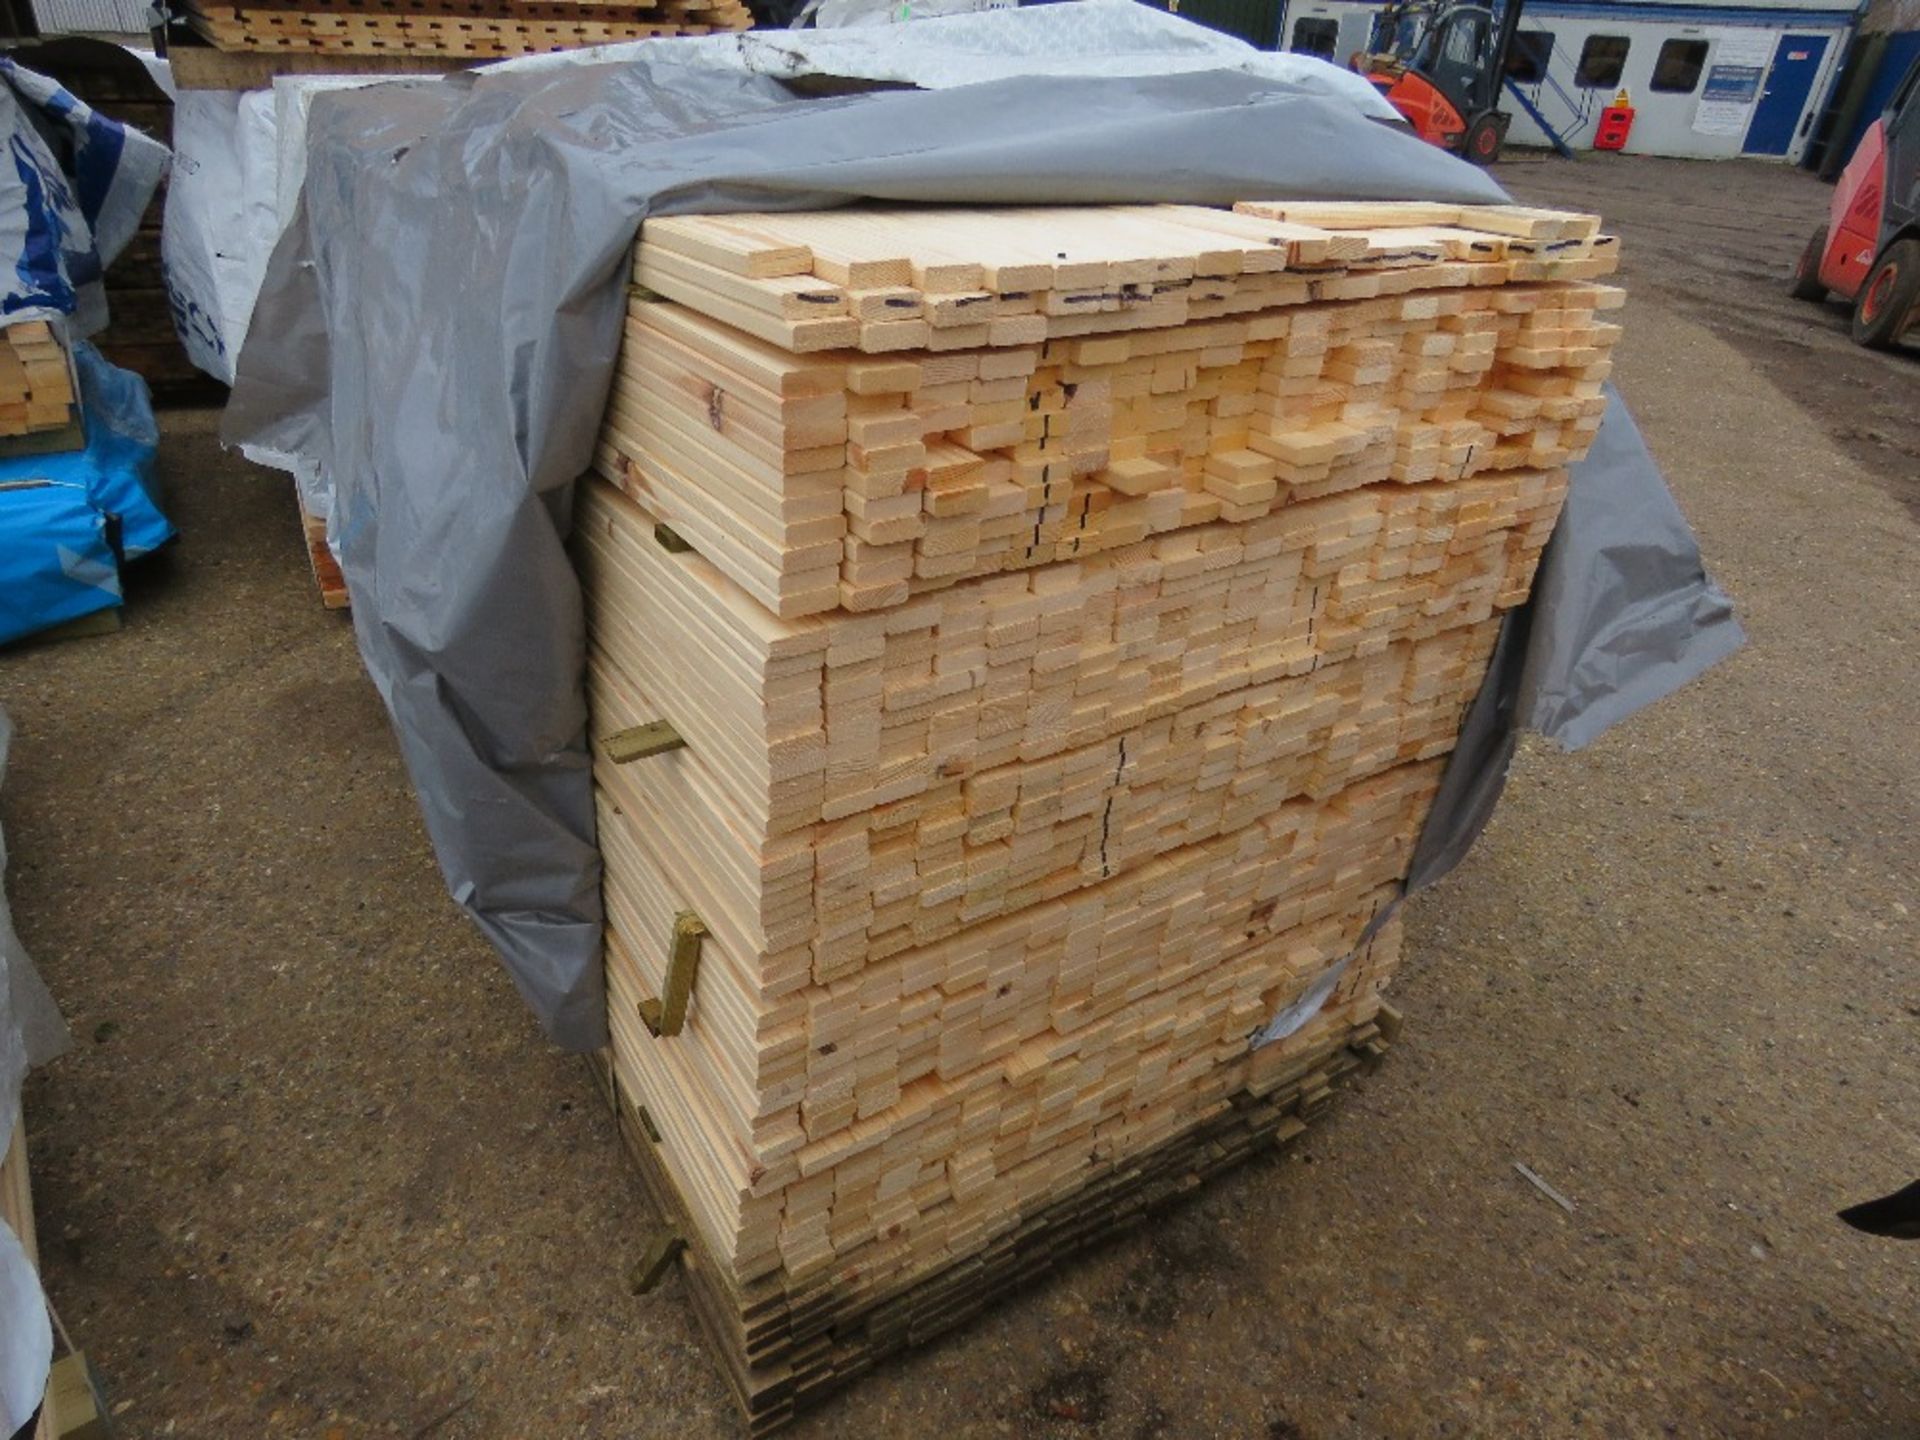 EXTRA LARGE PACK OF UNTREATED VENETIAN PALE / TRELLIS TIMBER BOARDS: 1.83M LENGTH X 45MM X 17MM AP